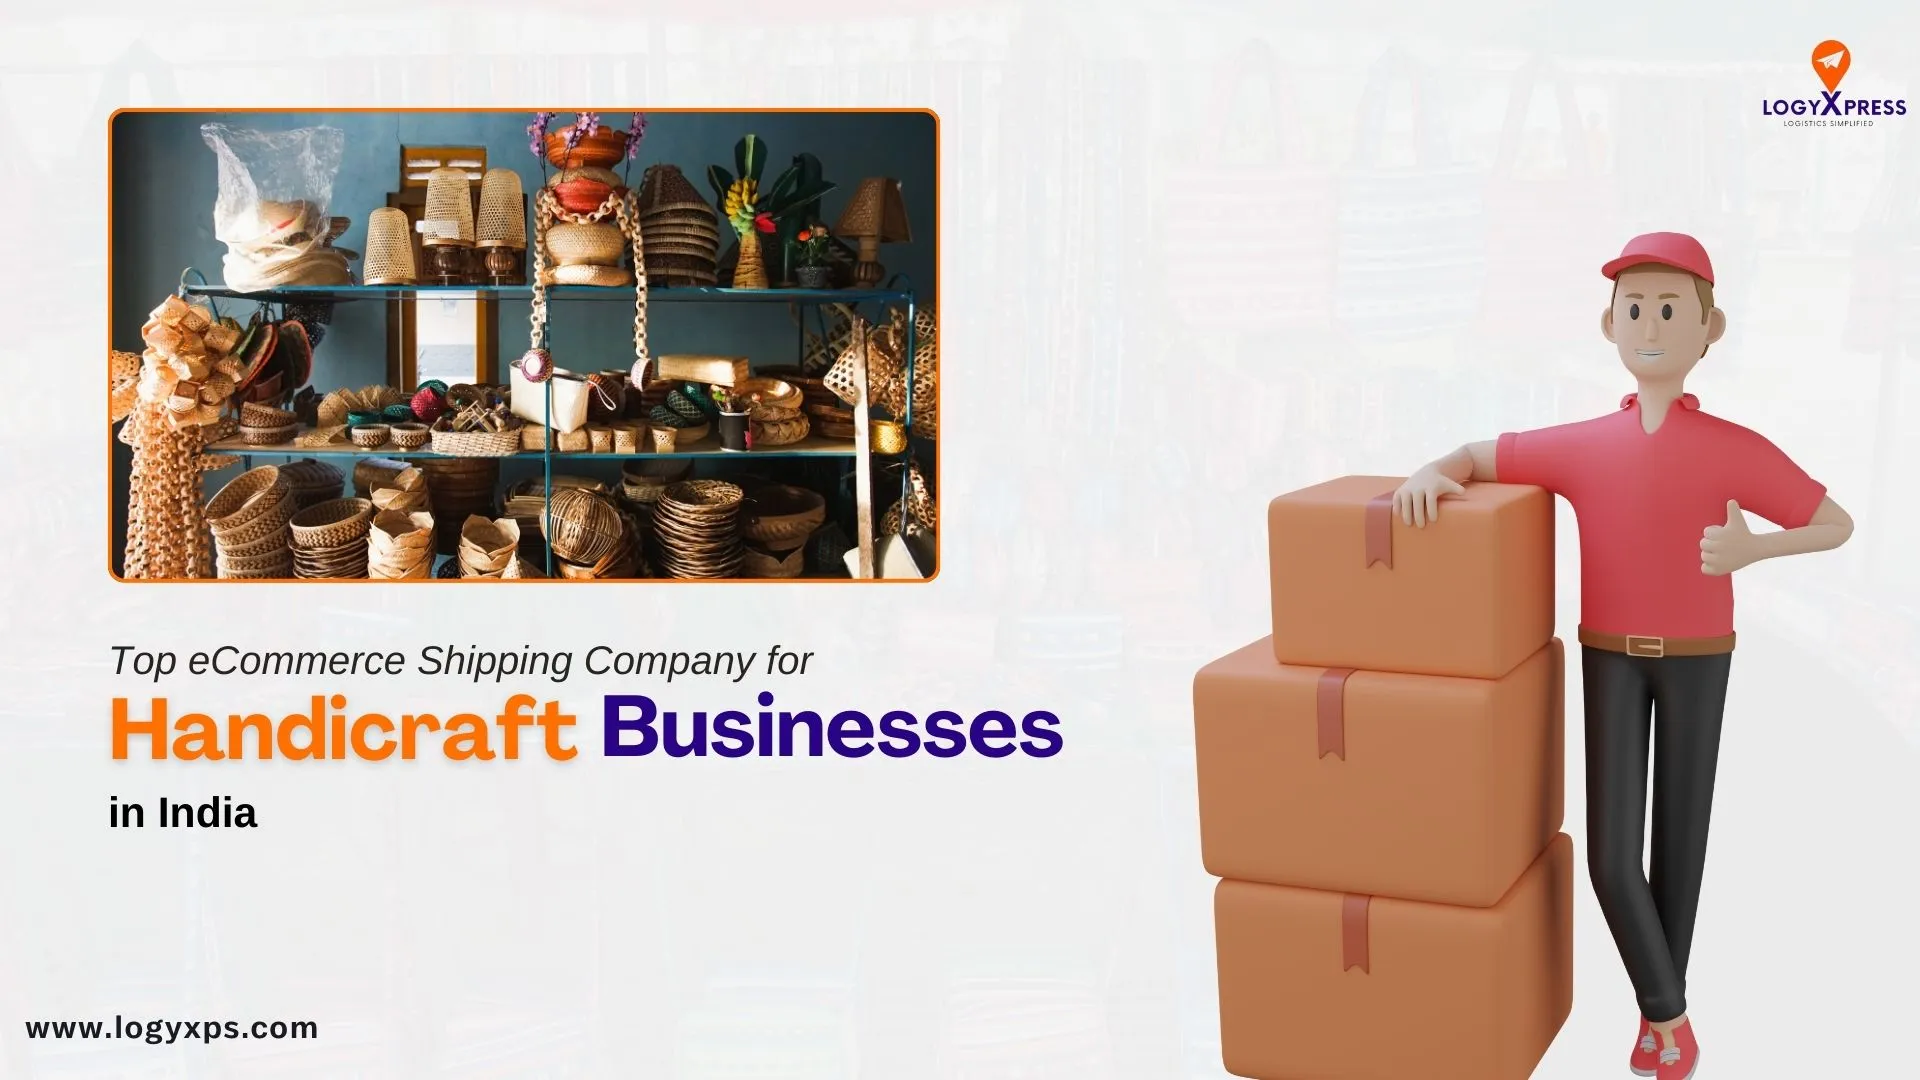 Top eCommerce Shipping Company for Handicraft Businesses in India